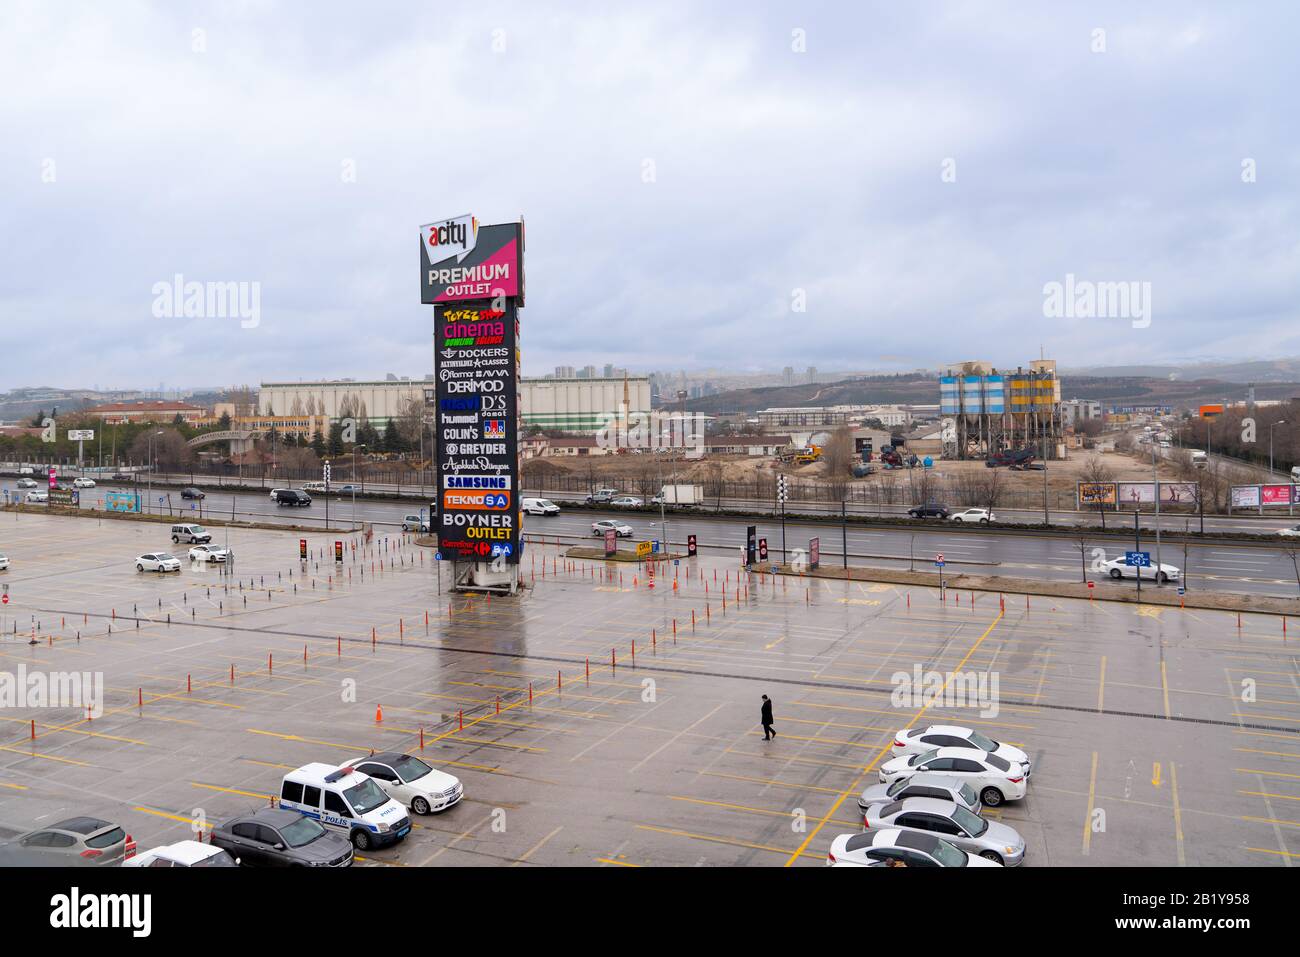 Ankara/Turkey-February 22 2020: A billboard sign for a mall advertising store and their logos Stock Photo - Alamy